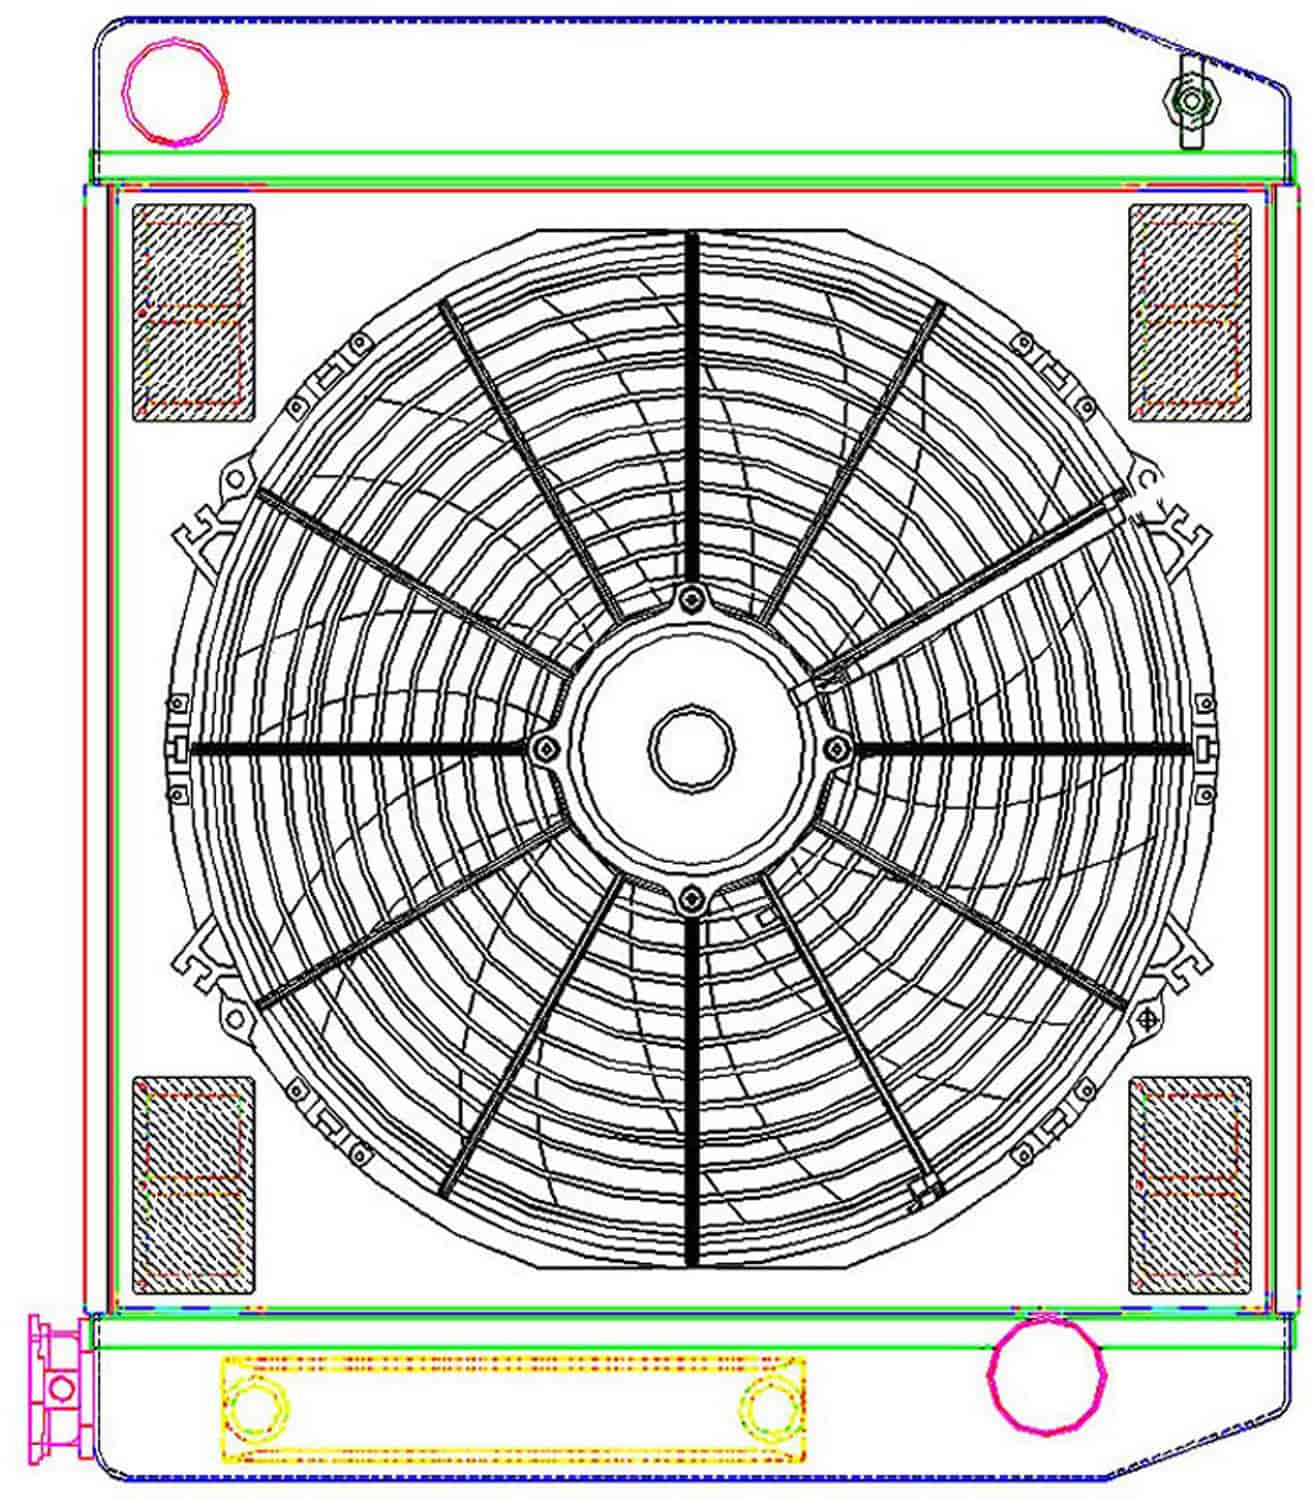 MegaCool ComboUnit Universal Fit Radiator and Fan Single Pass Crossflow Design 22" x 19" with Transmission Cooler